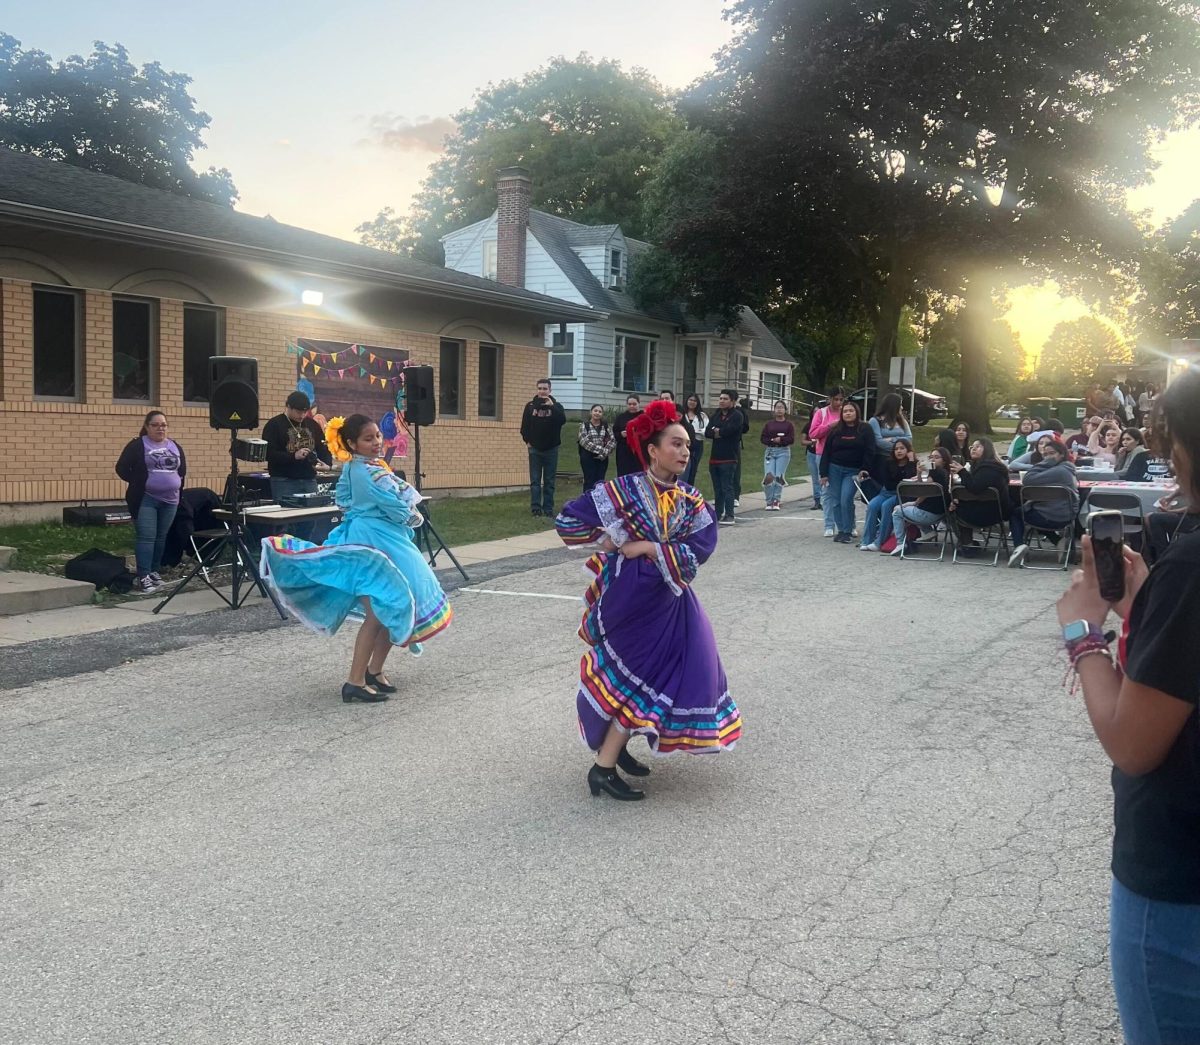 Folklórico dancers perform for a crowd Sept. 13 at the Latino Resource Center for El Grito. El Grito is celebrated on the eve of Mexican Independence Day, but was celebrated in honor of all Latino heritage at the event. (Kaitlyn Lee-Gordon | Northern Star)